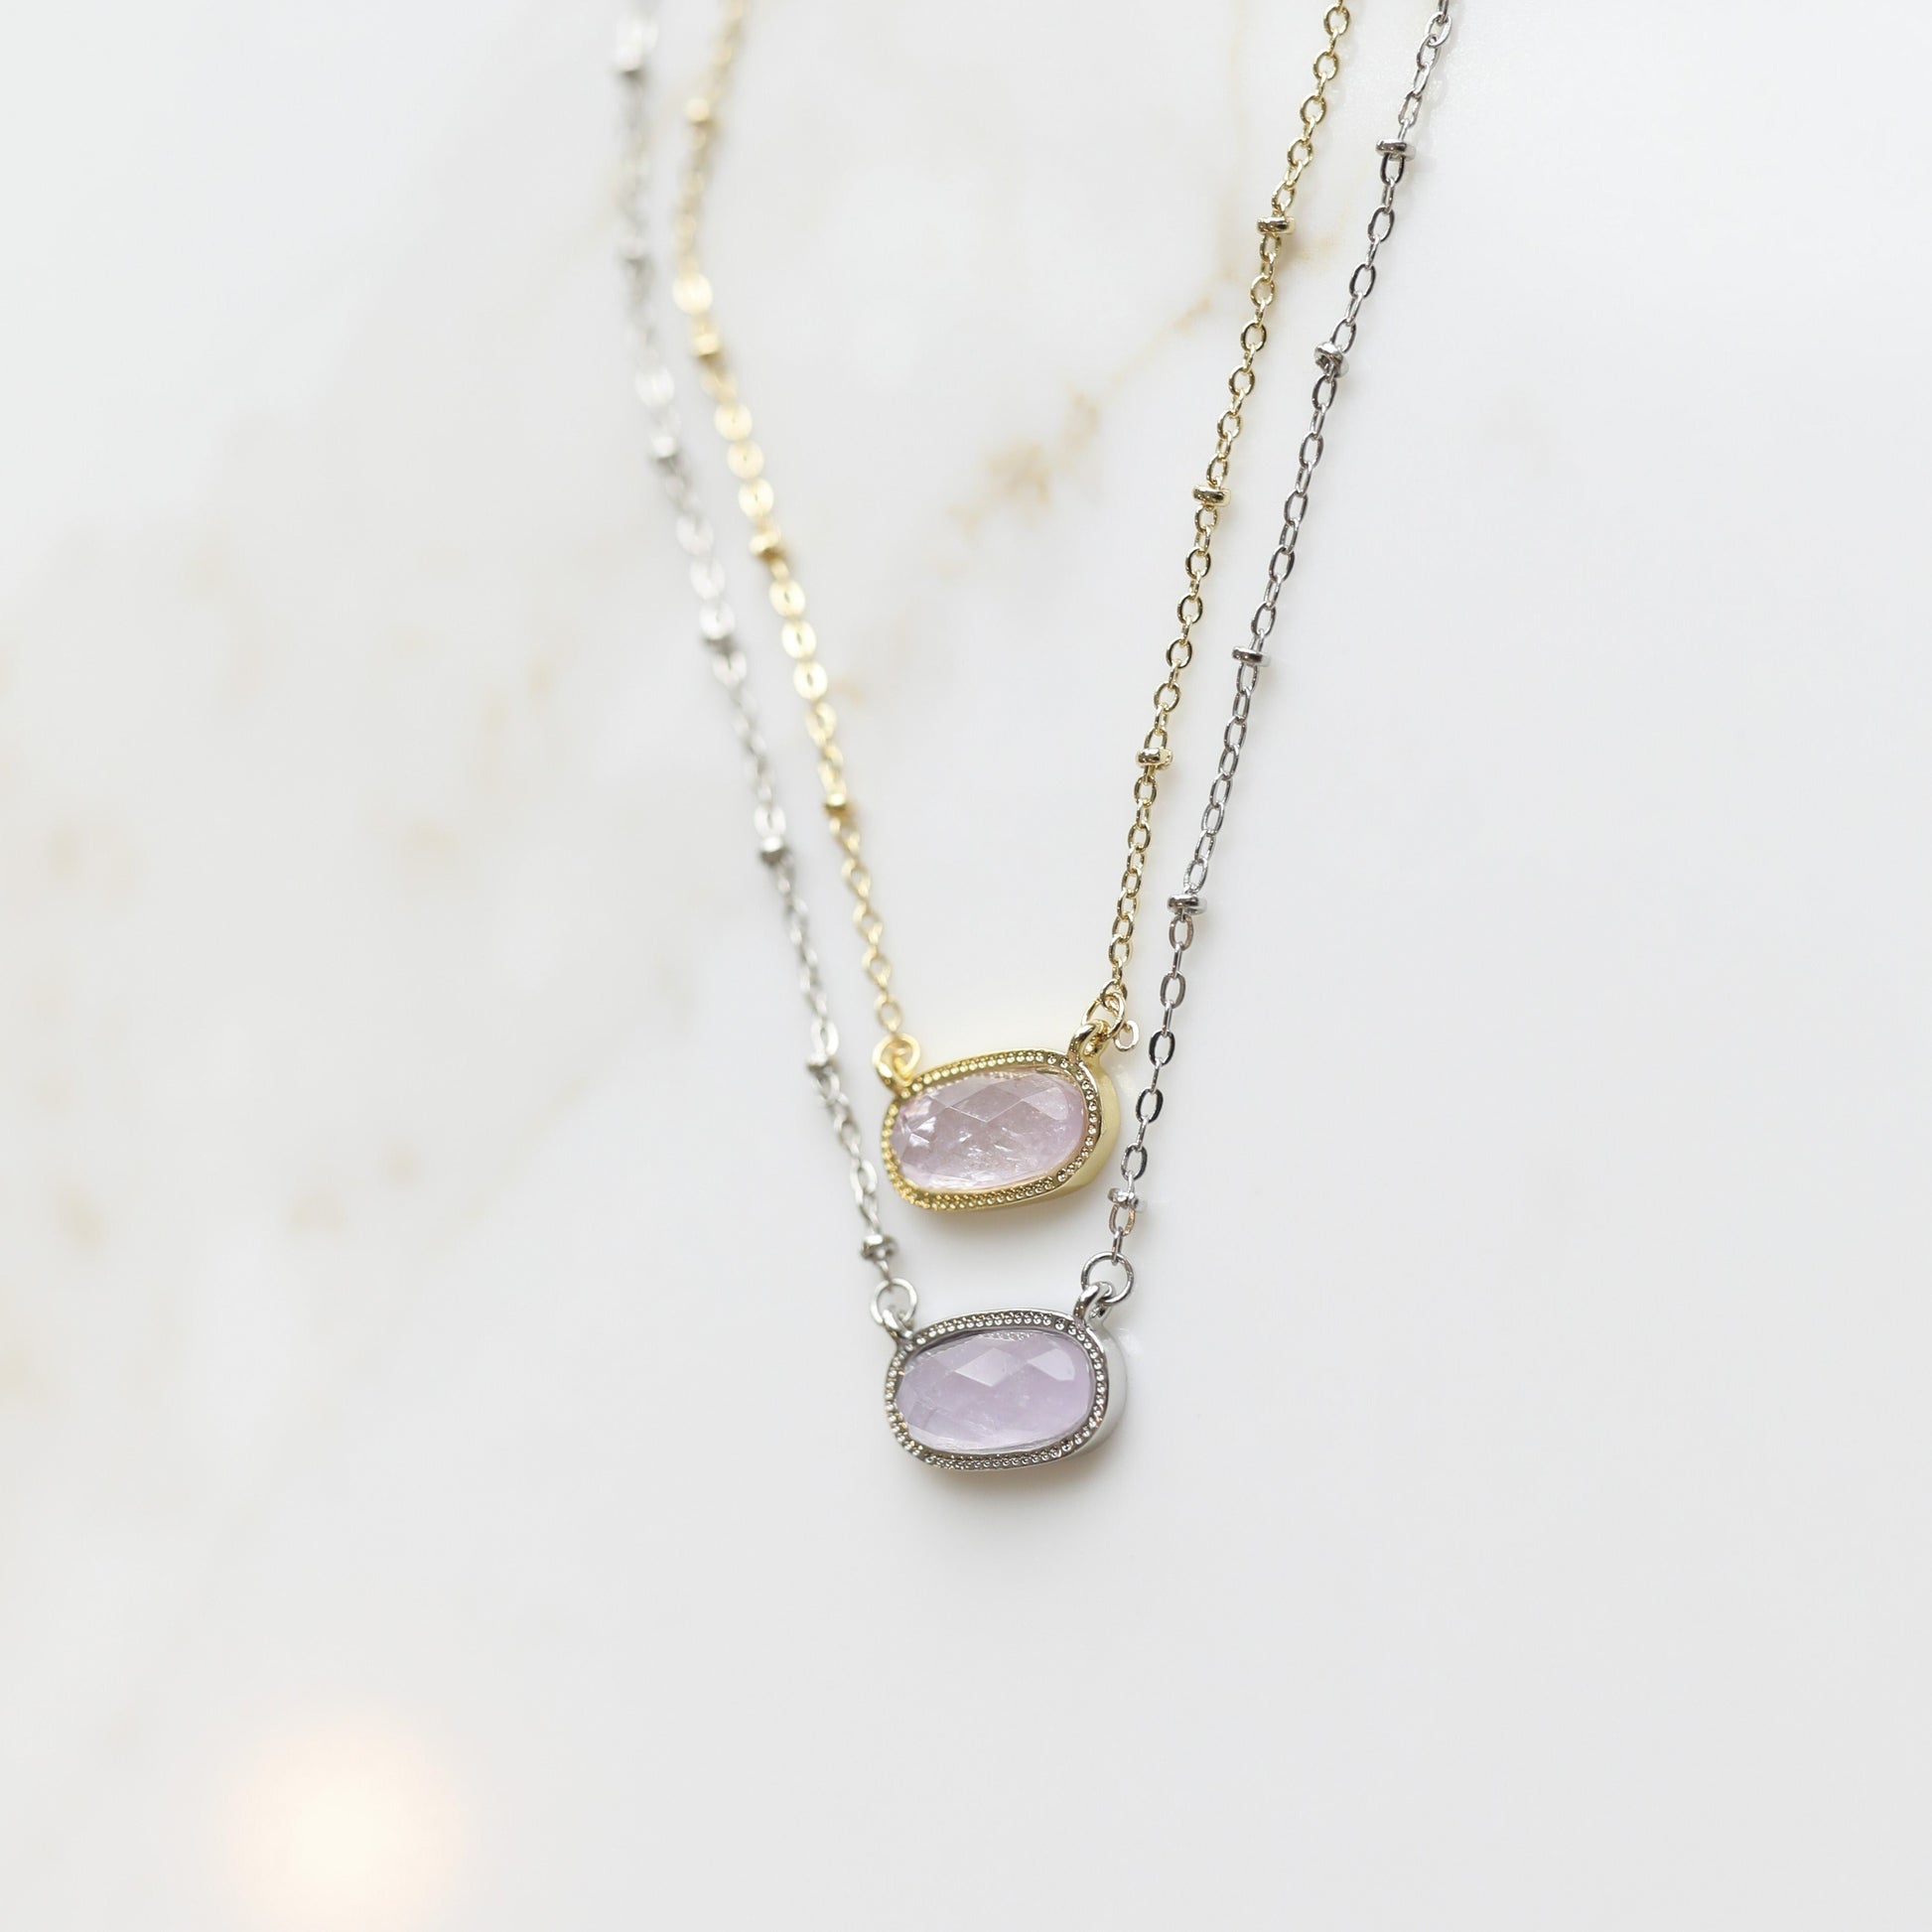 Meaningful Gemstone Necklace in Amethyst Light available with a Gold or Silver chain